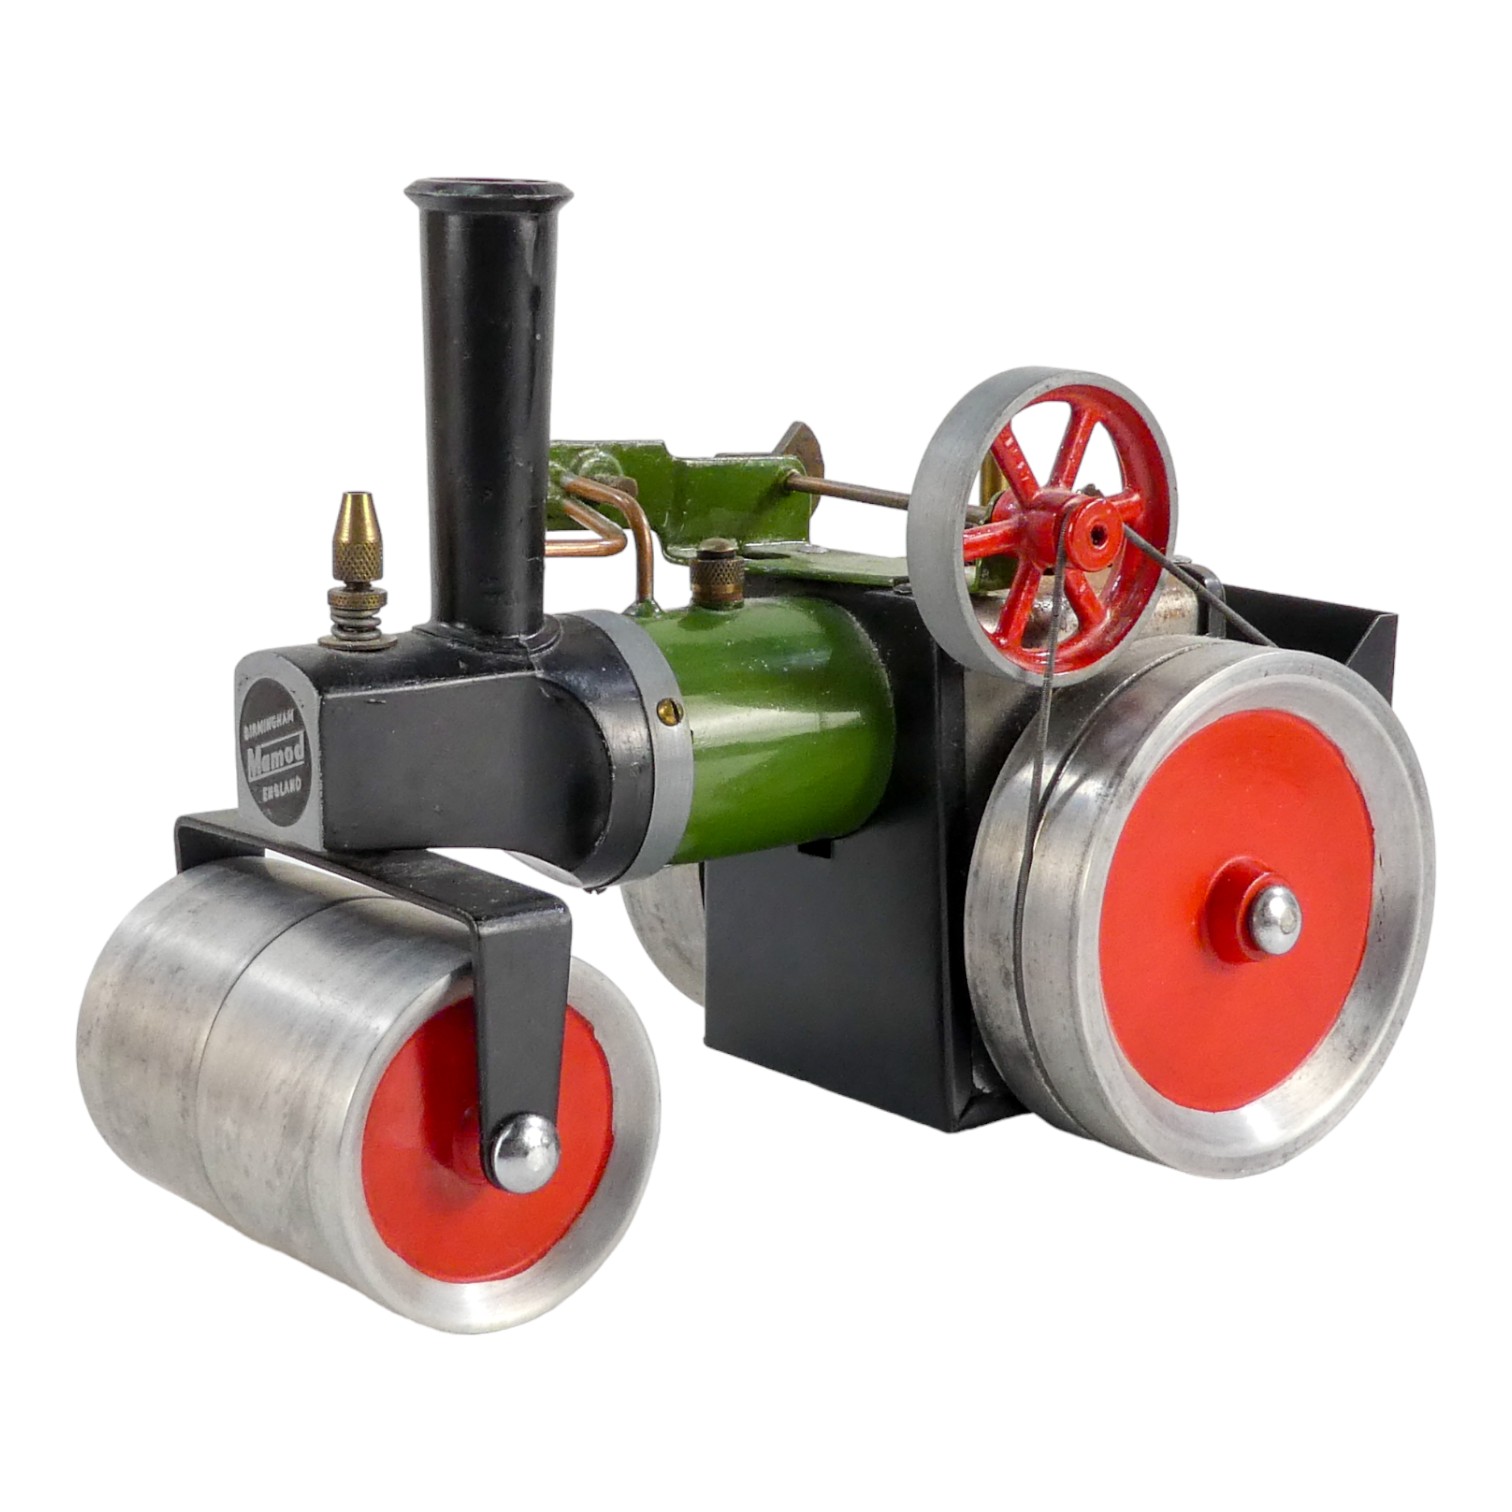 A Mamod steam roller - boxed with accessories, 22cm. - Image 3 of 7